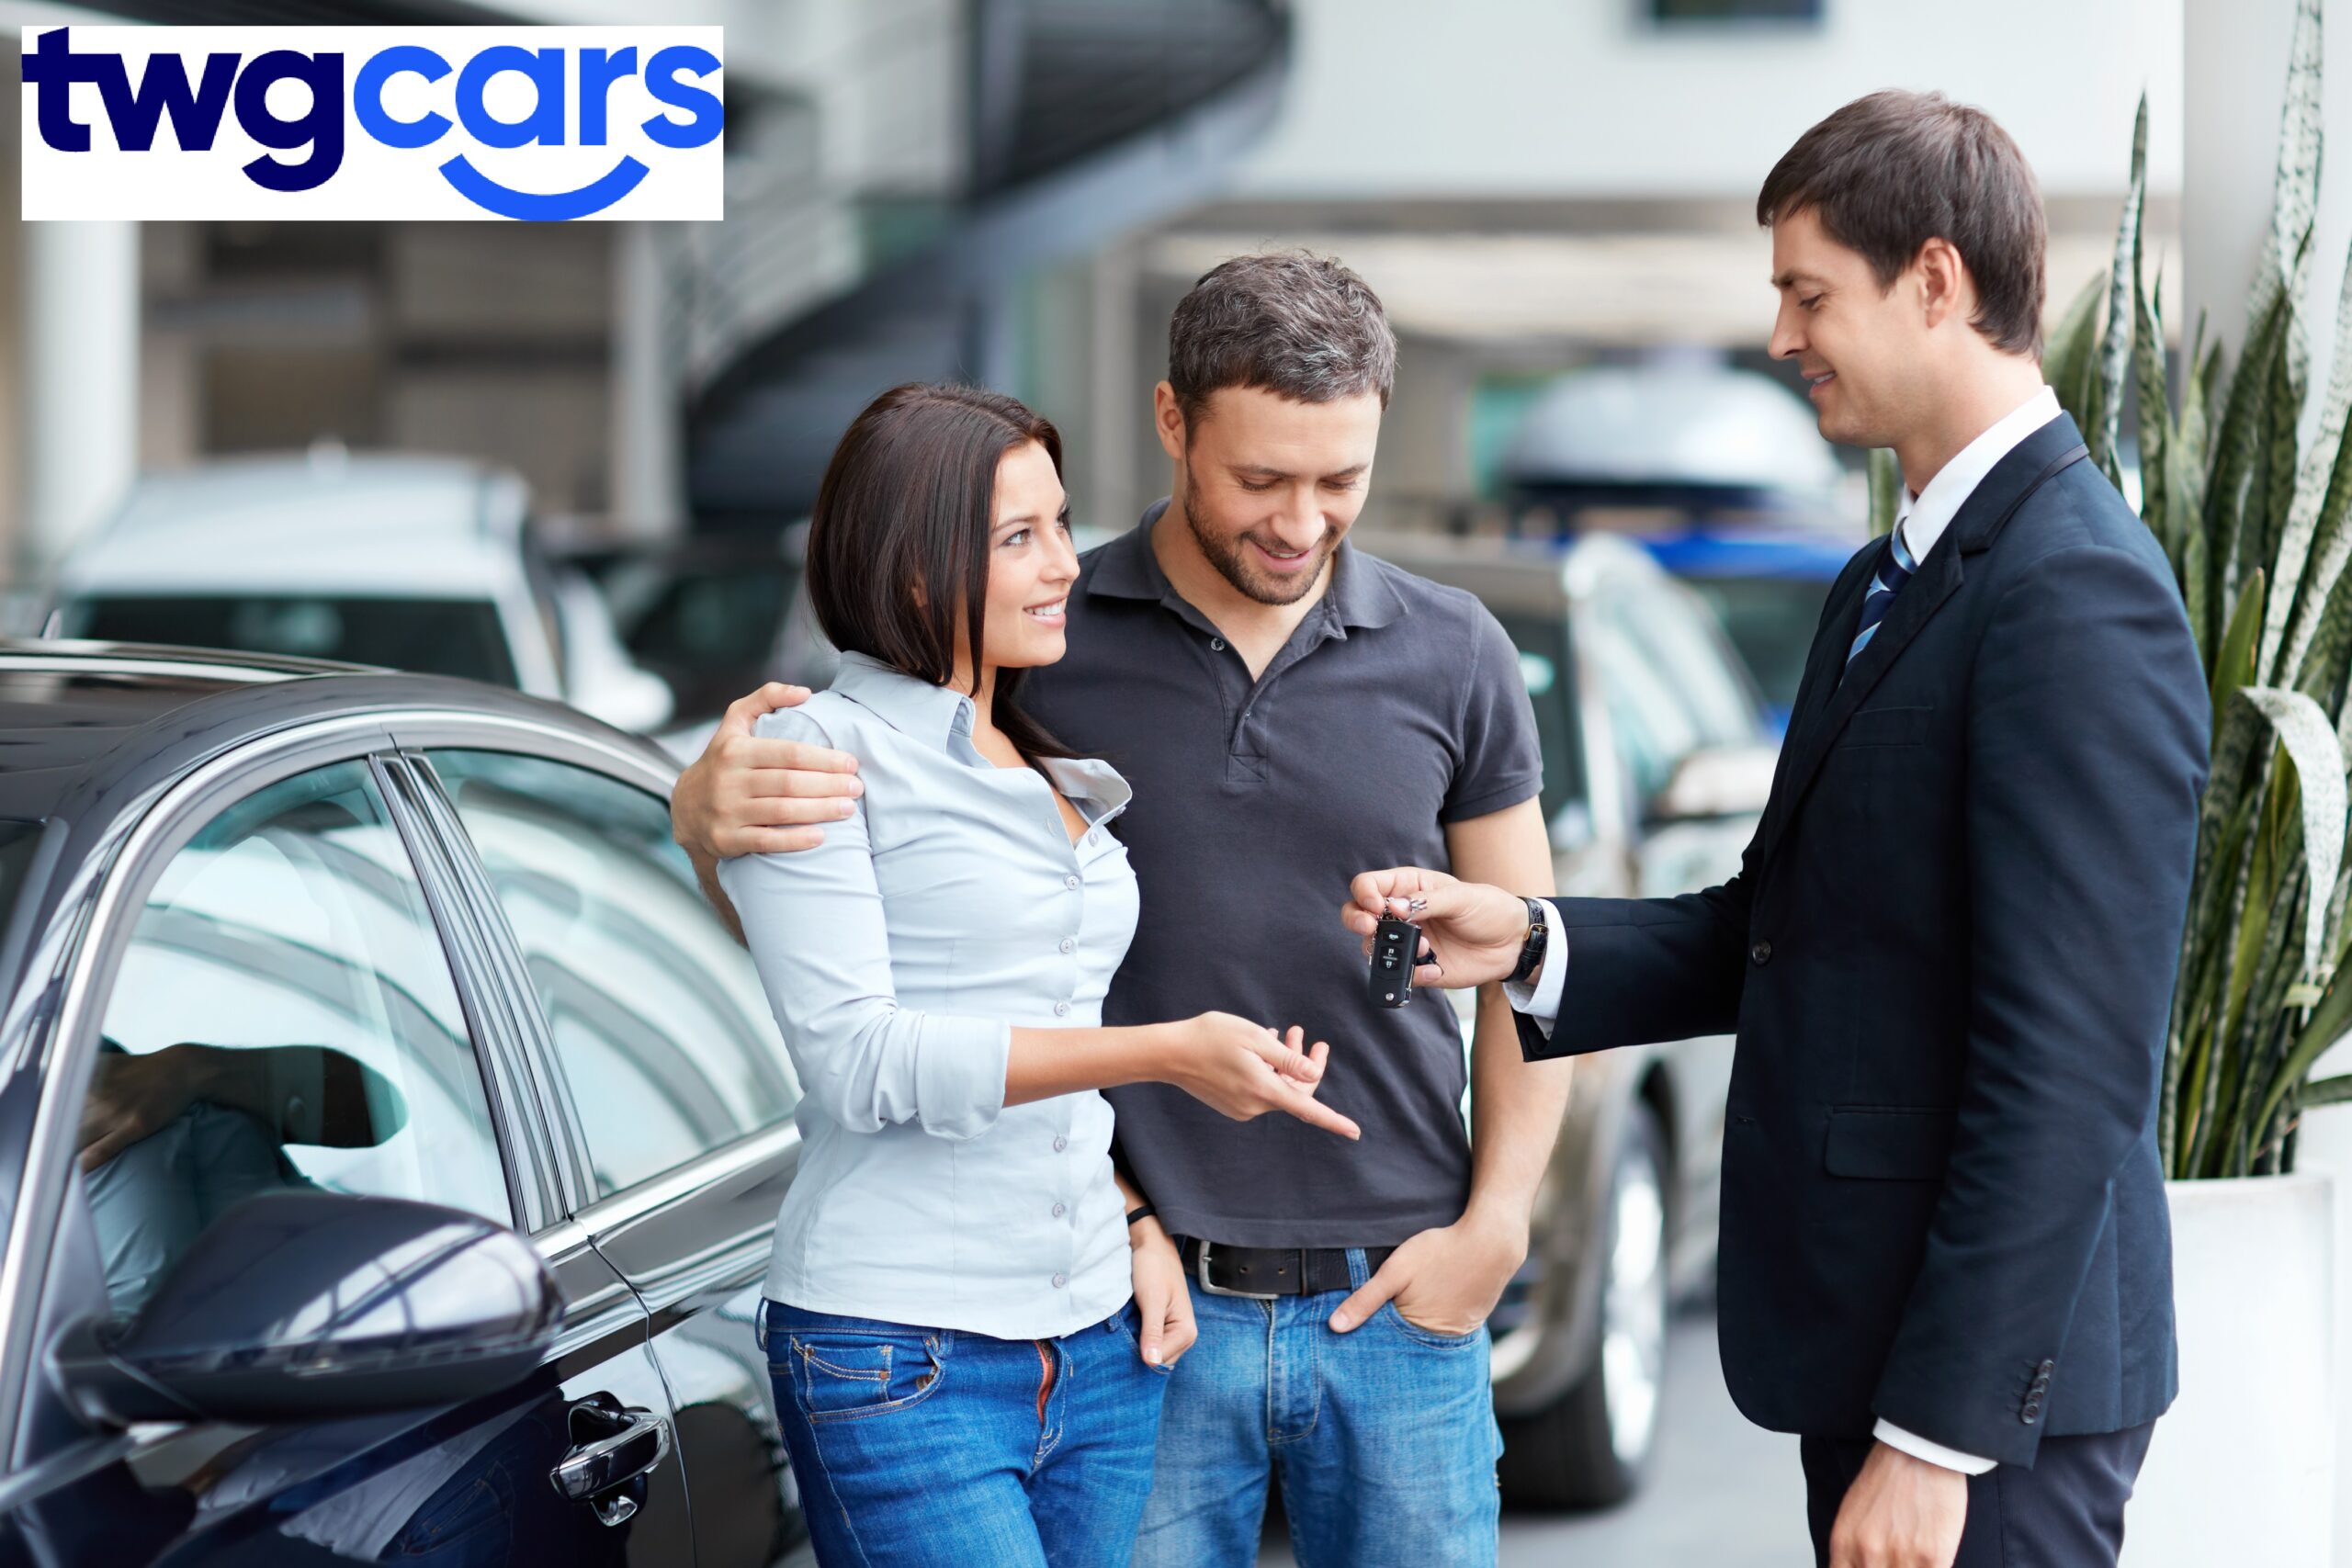 How To Buy Cars In A Hassle Free Way?